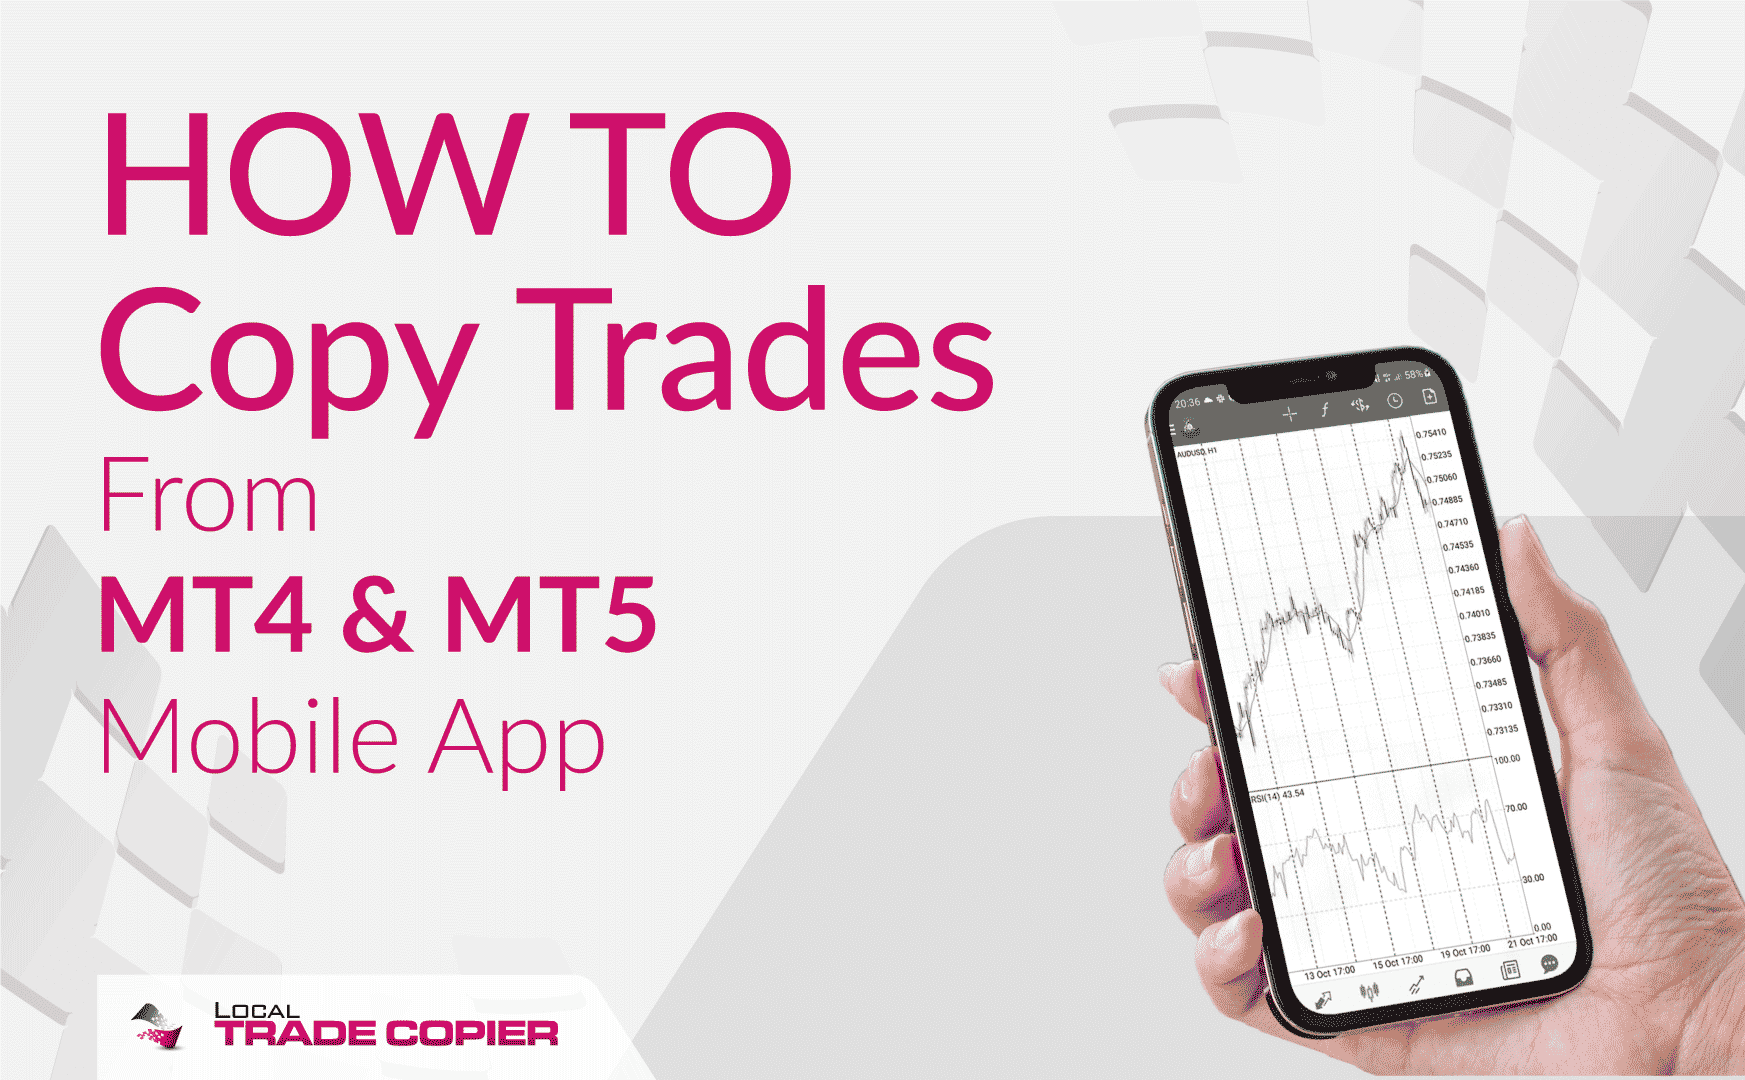 Local-Trade-Copier-Tutorials-How-To-Copy-Trades-From-MT4-&-MT5-Mobile-App-1745x1080